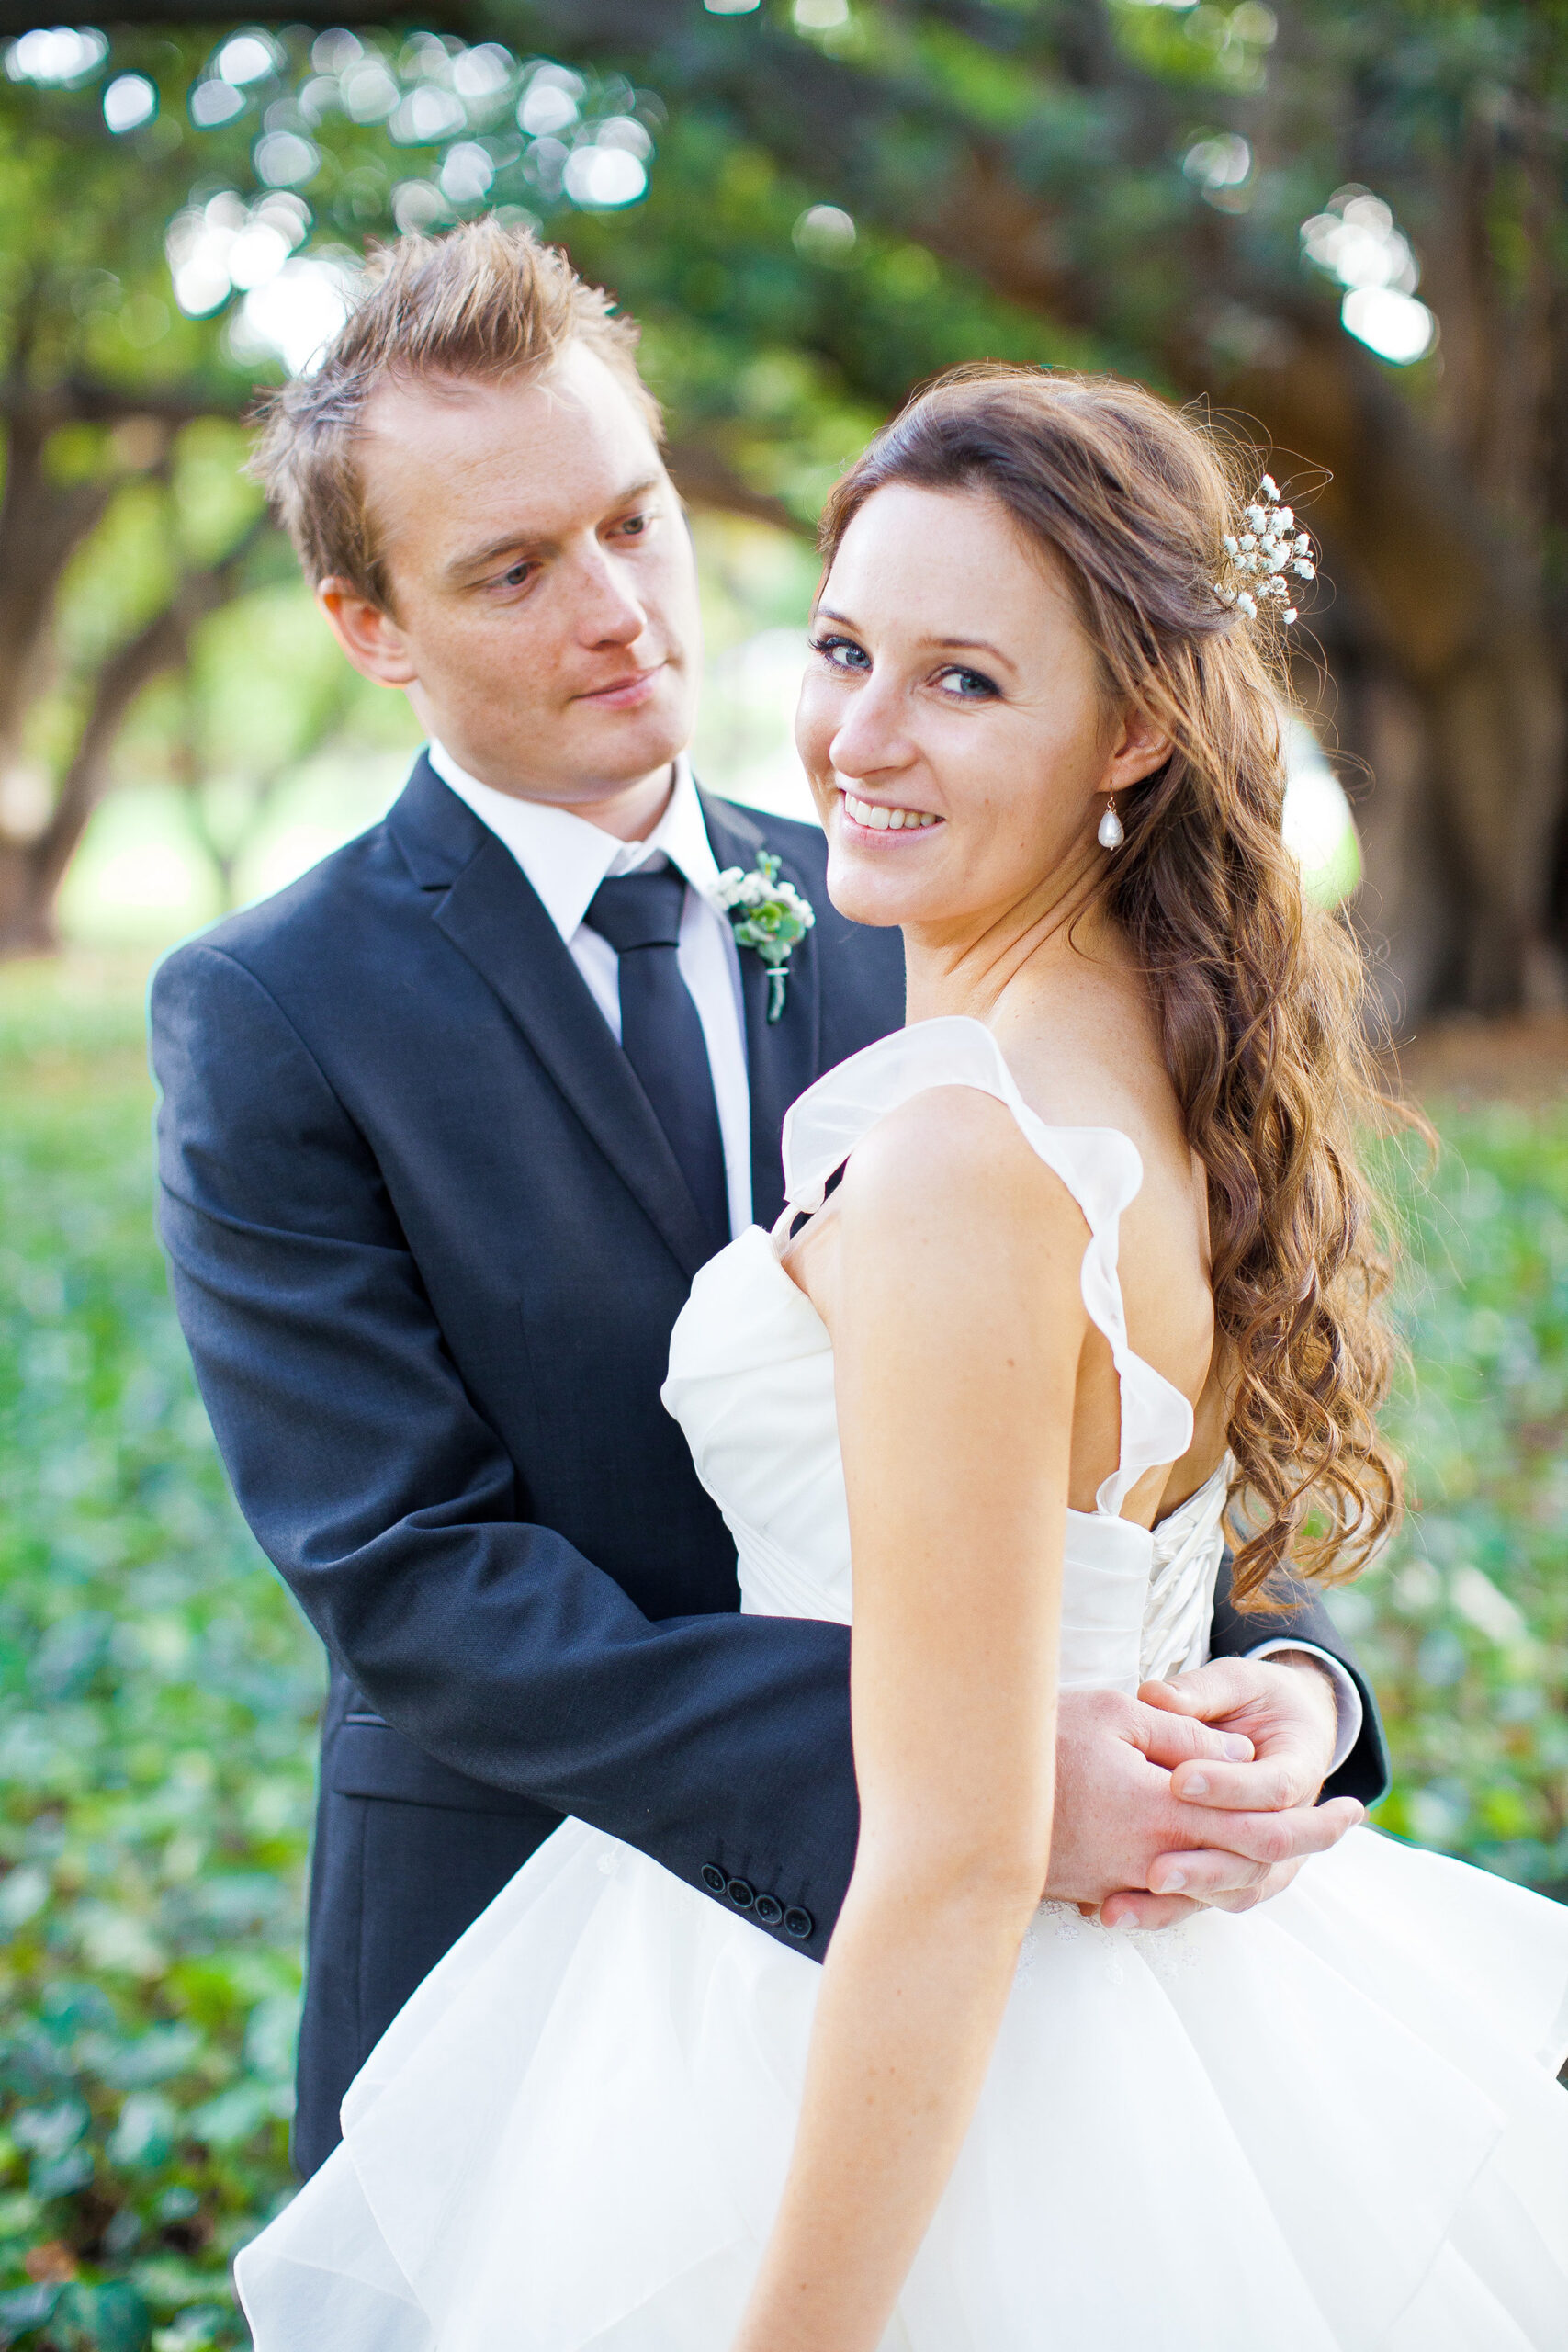 View More: http://kirsty-russell.pass.us/caitlin--wills-wedding